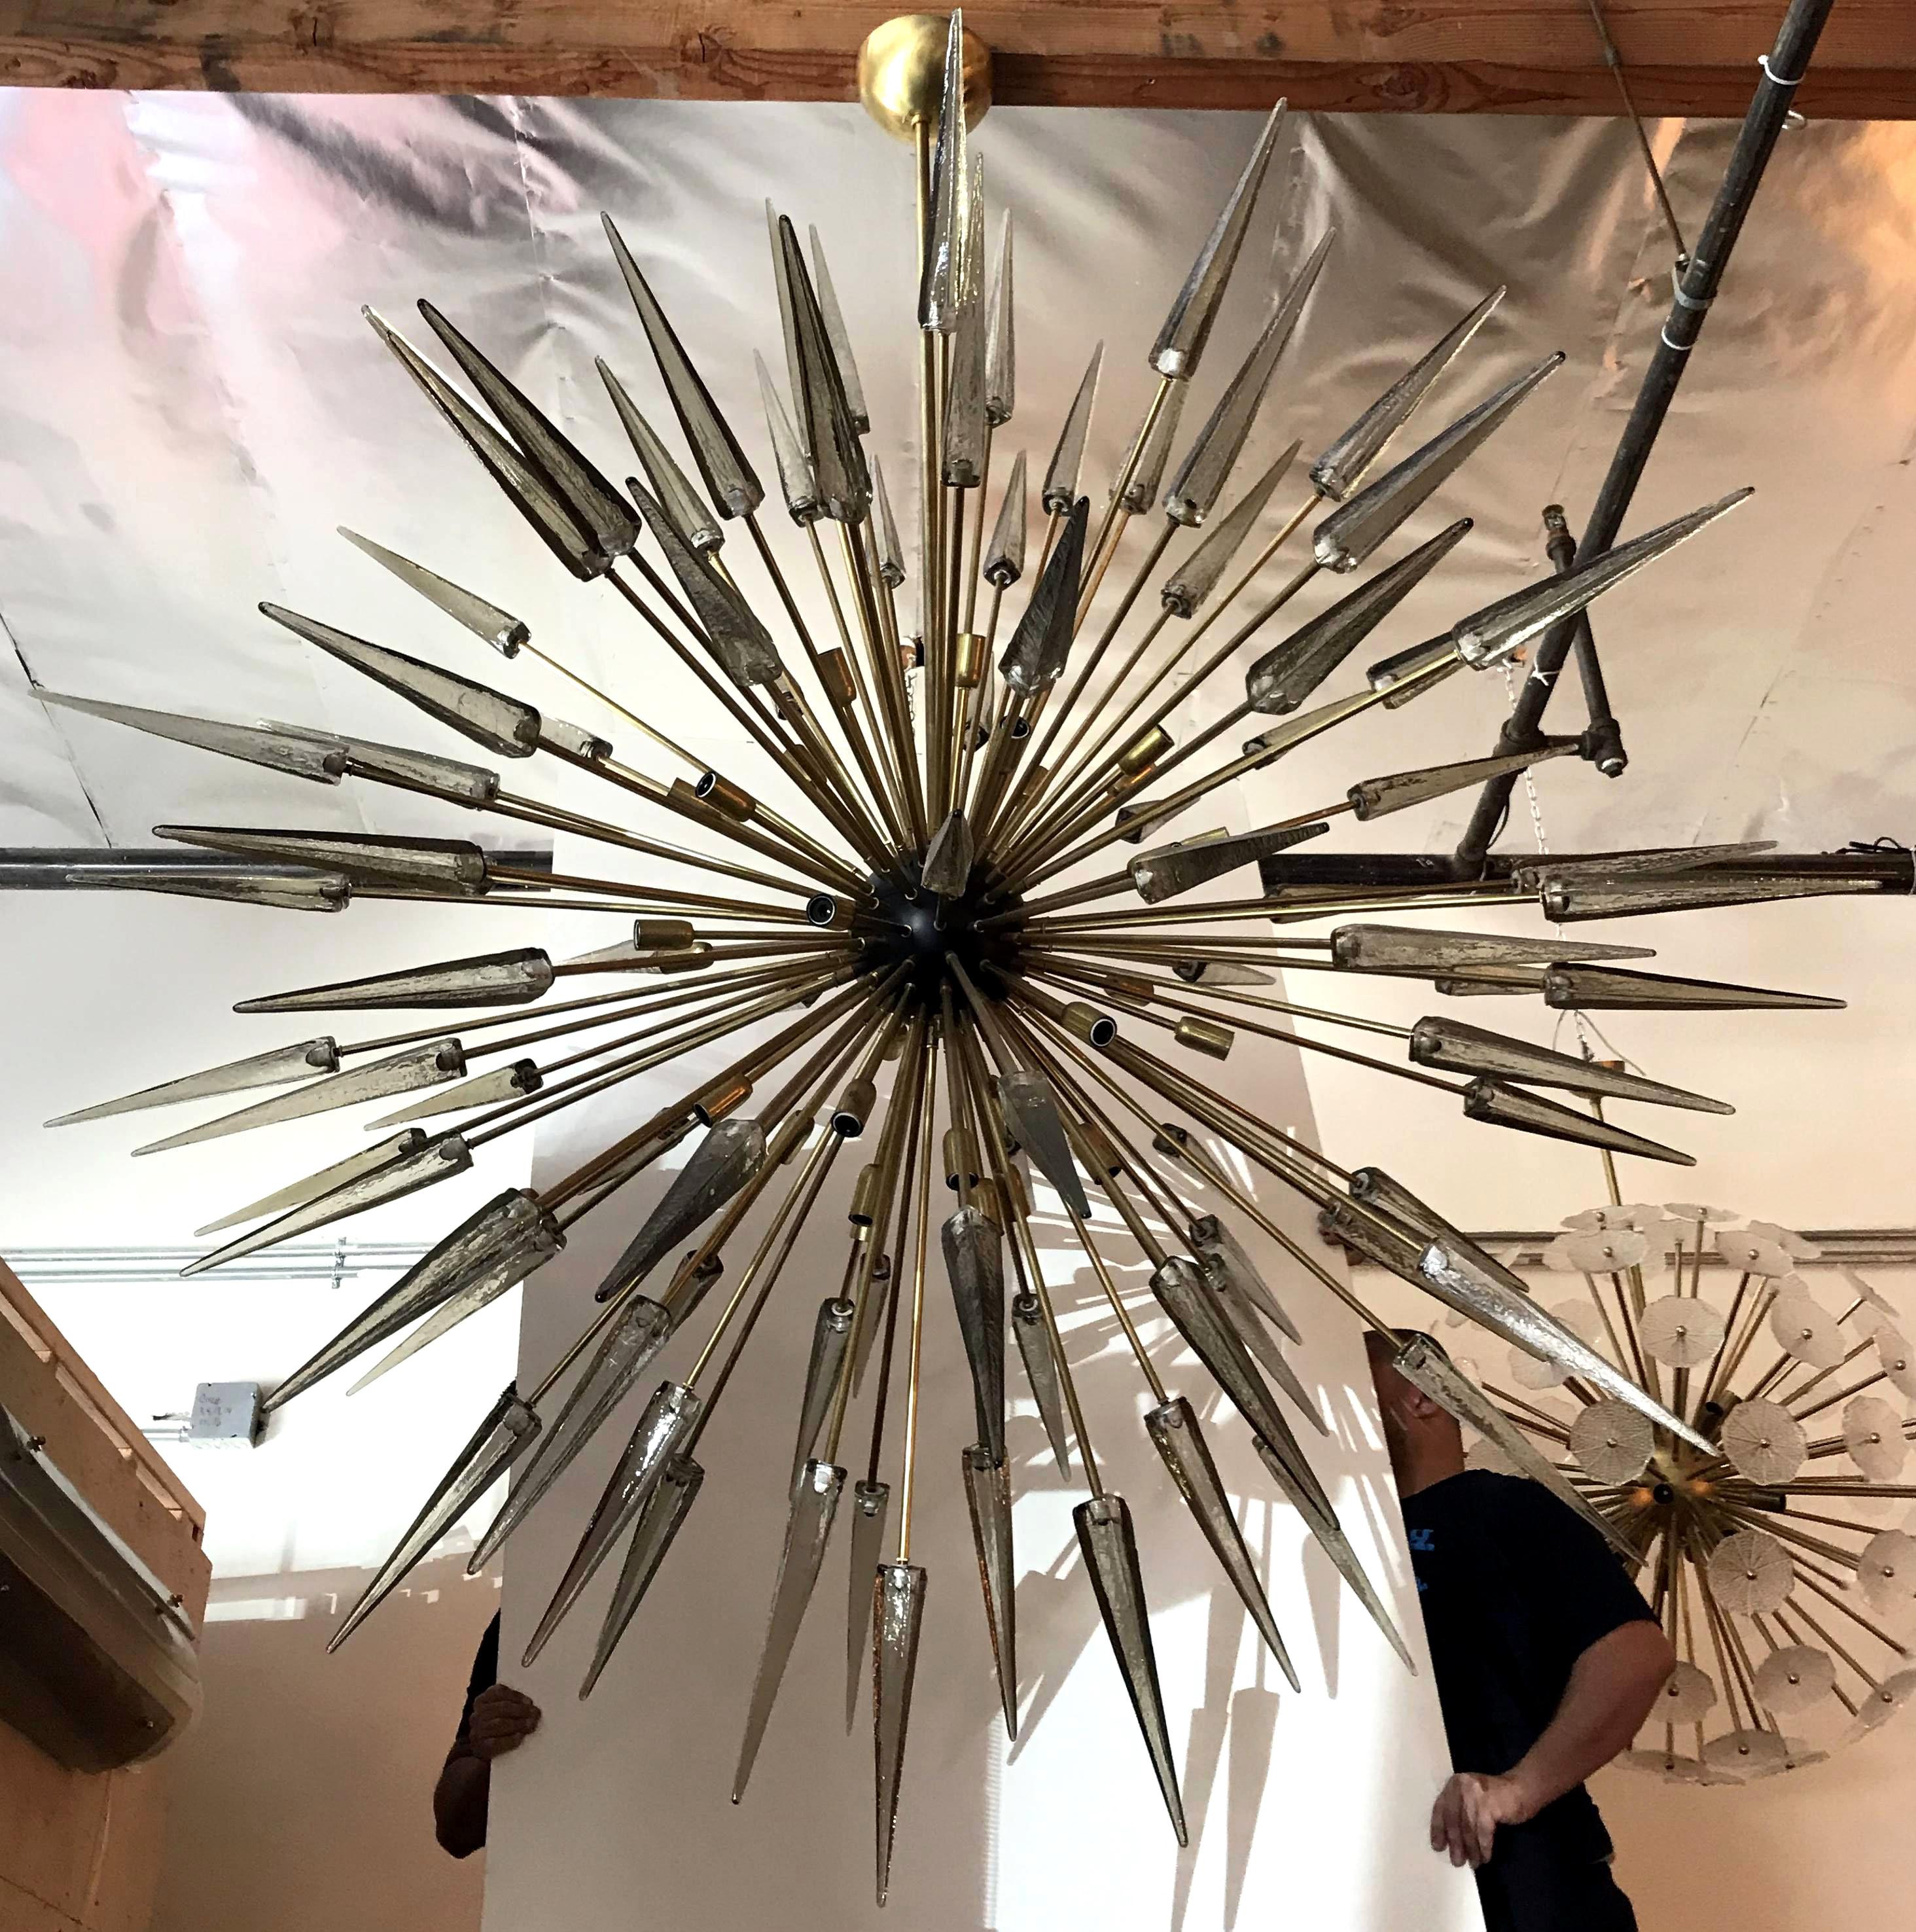 Italian modern sputnik chandelier with smoky Murano glass shards spikes, mounted on natural unlacquered brass frame with black enameled centre, designed by Fabio Bergomi for Fabio Ltd / Made in Italy
30 lights / E12 or E14 type / max 40 W